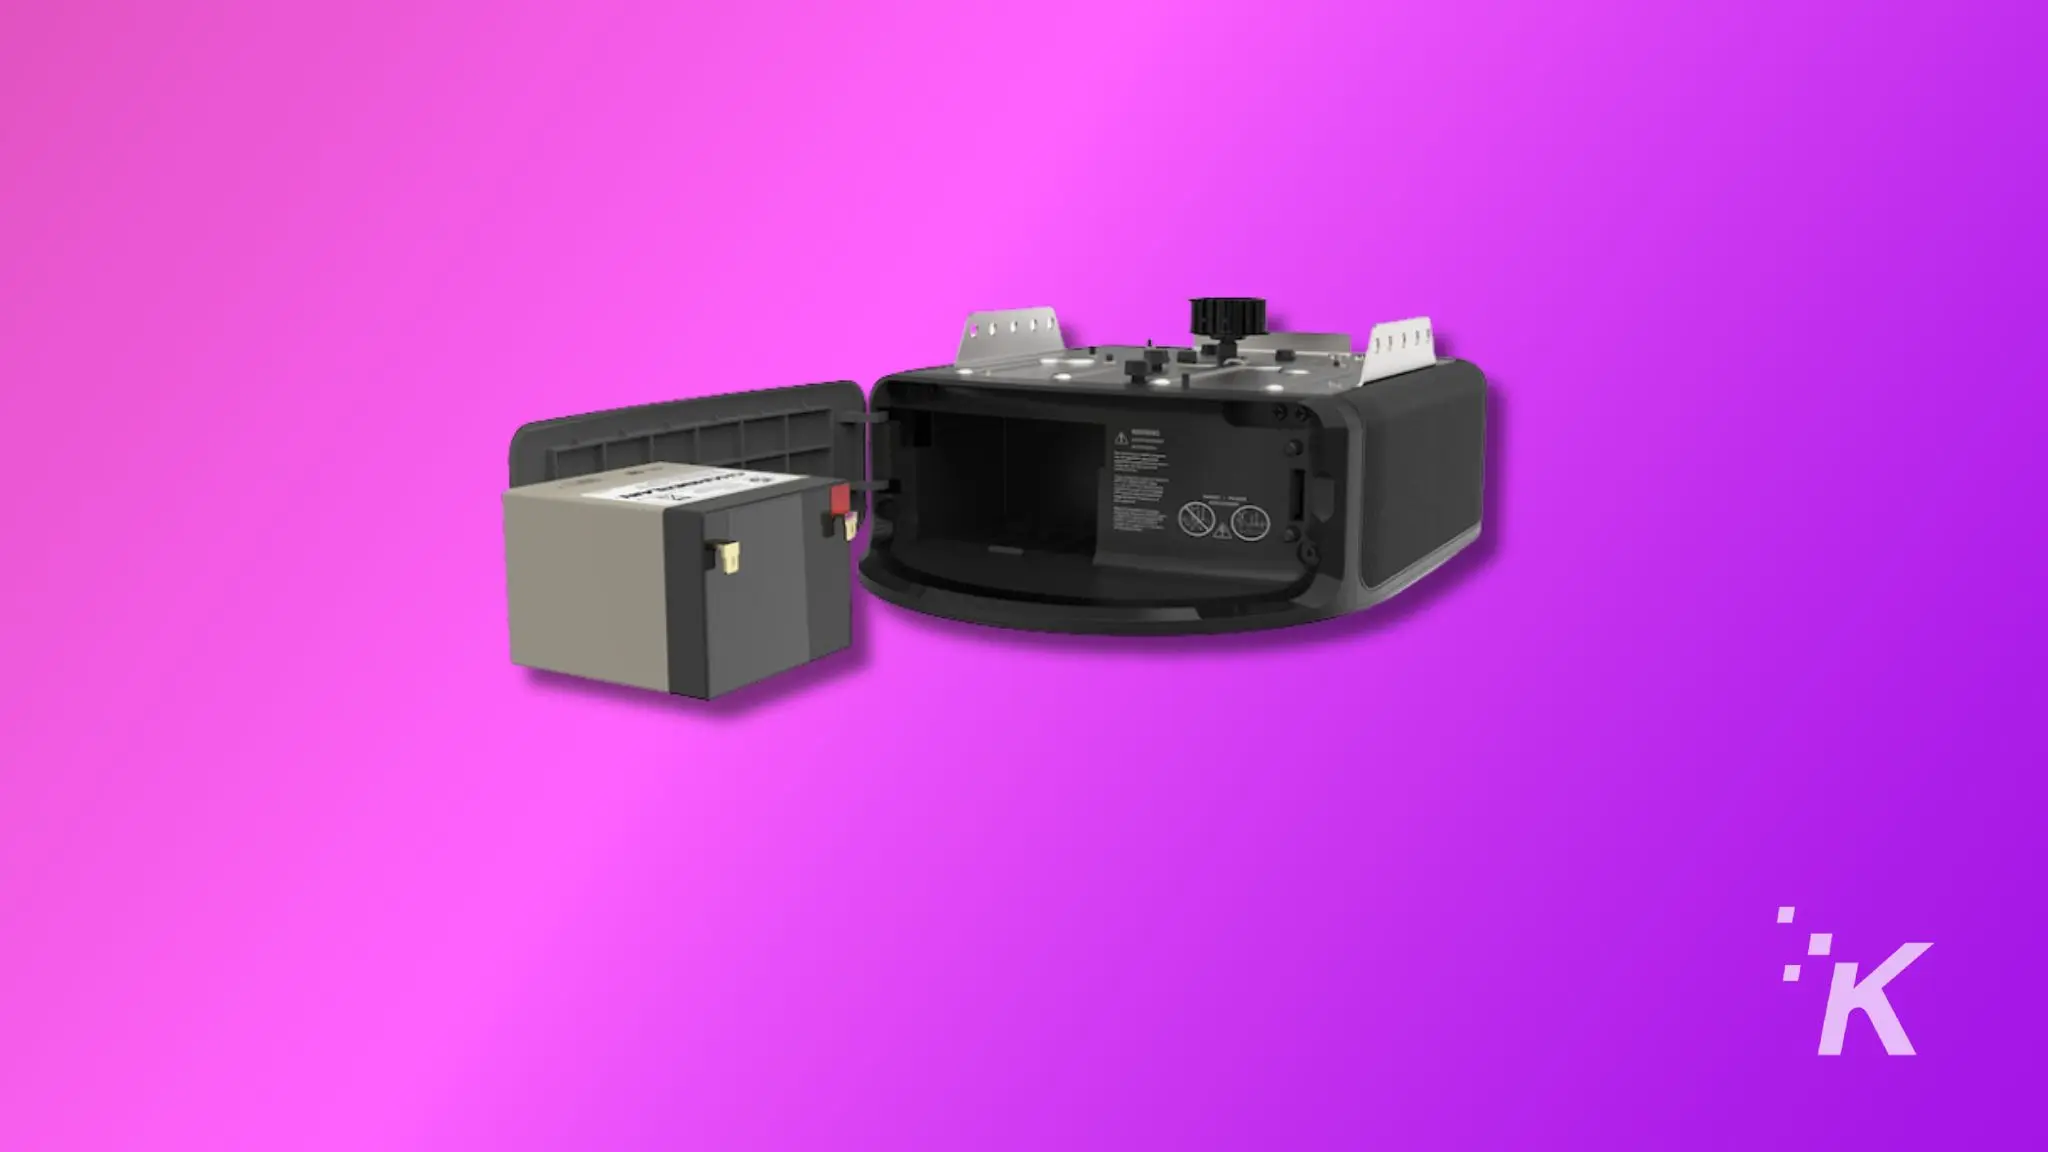 The image showing is garage door opener and its battery on the purple background